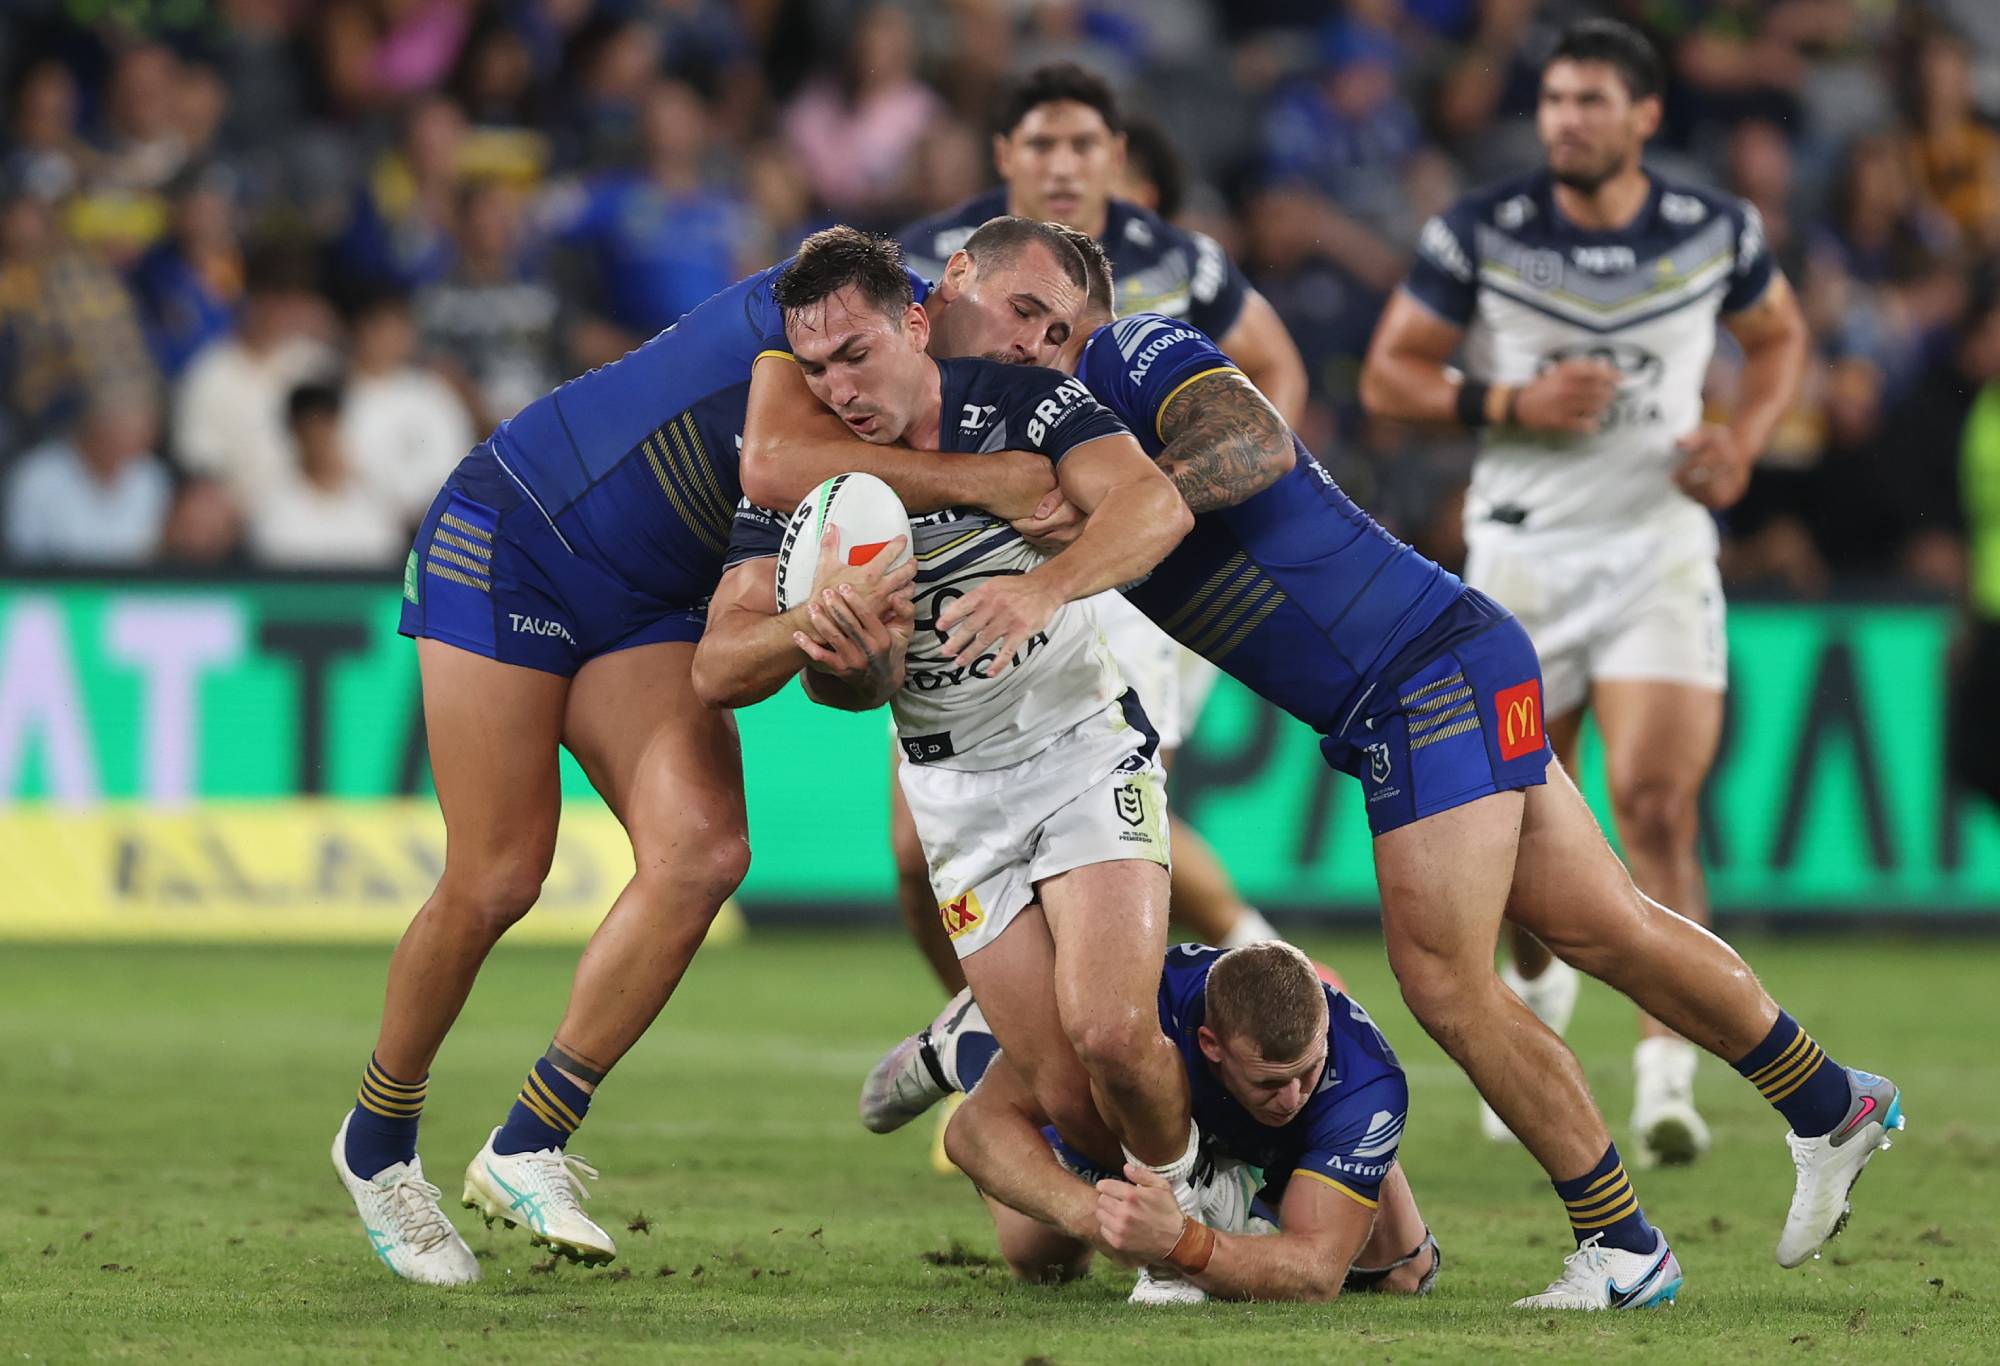 SYDNEY, AUSTRALIA - APRIL 13: Reece Robson of the Cowboys is tackled by Reagan Campbell-Gillard of the Eels during the round six NRL match between Parramatta Eels and North Queensland Cowboys at CommBank Stadium on April 13, 2024 in Sydney, Australia. (Photo by Jason McCawley/Getty Images)